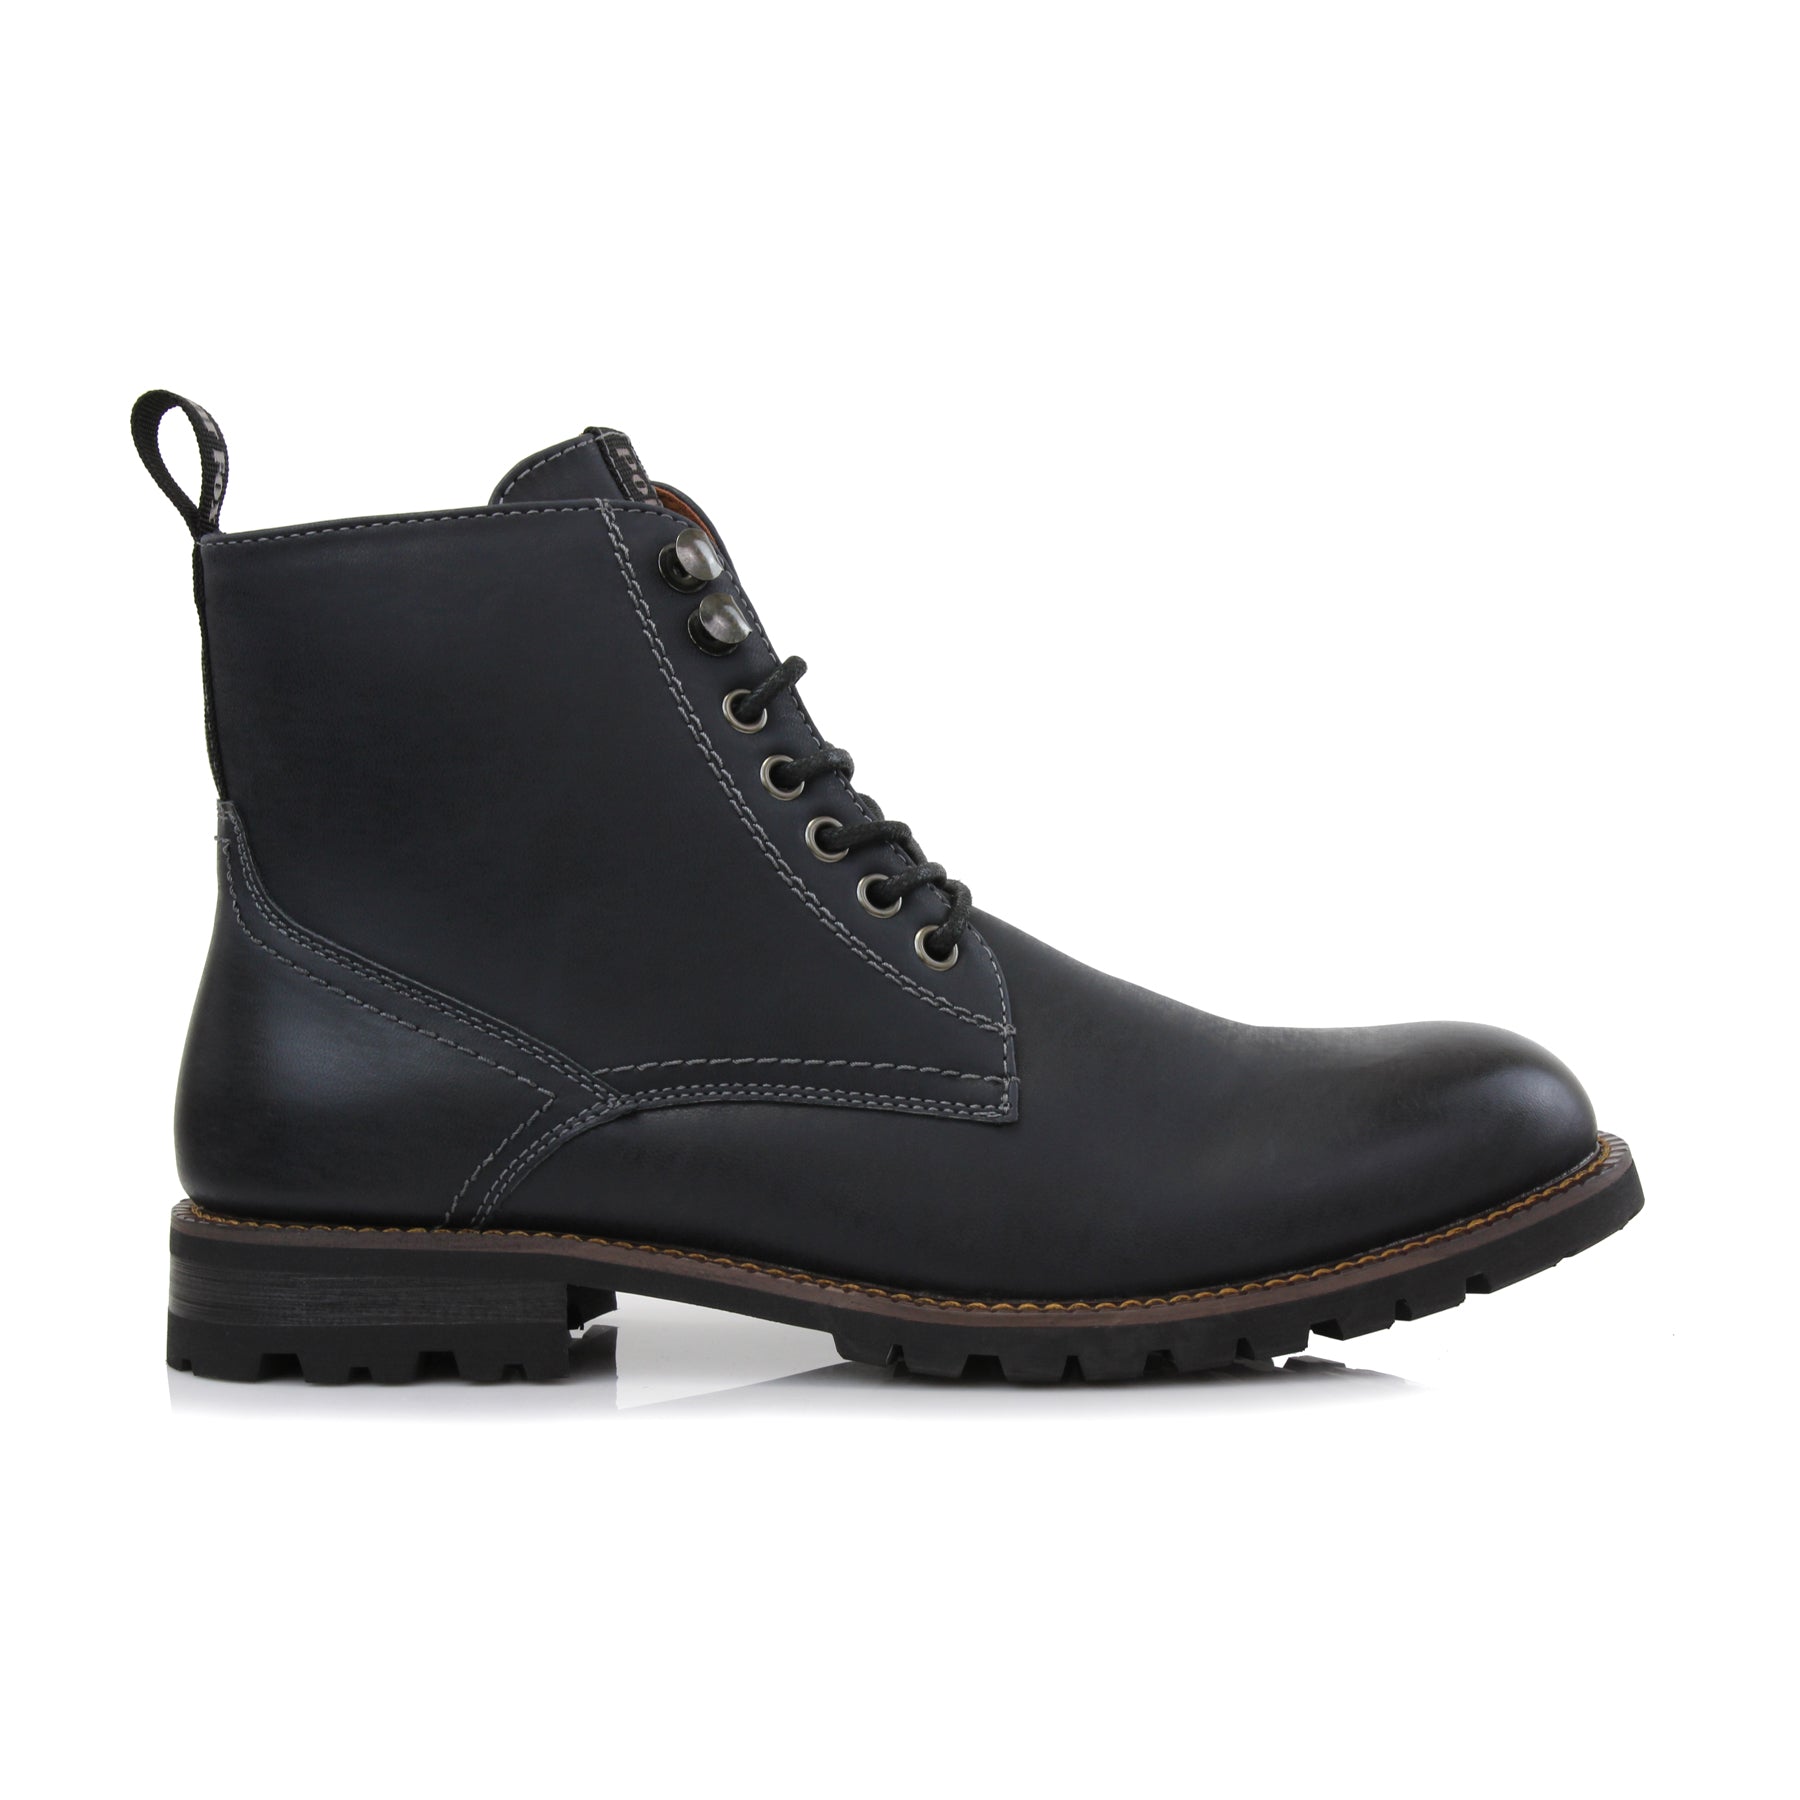 Grained Black Faux Leather Boots With Zipper Closure | Polar Fox 